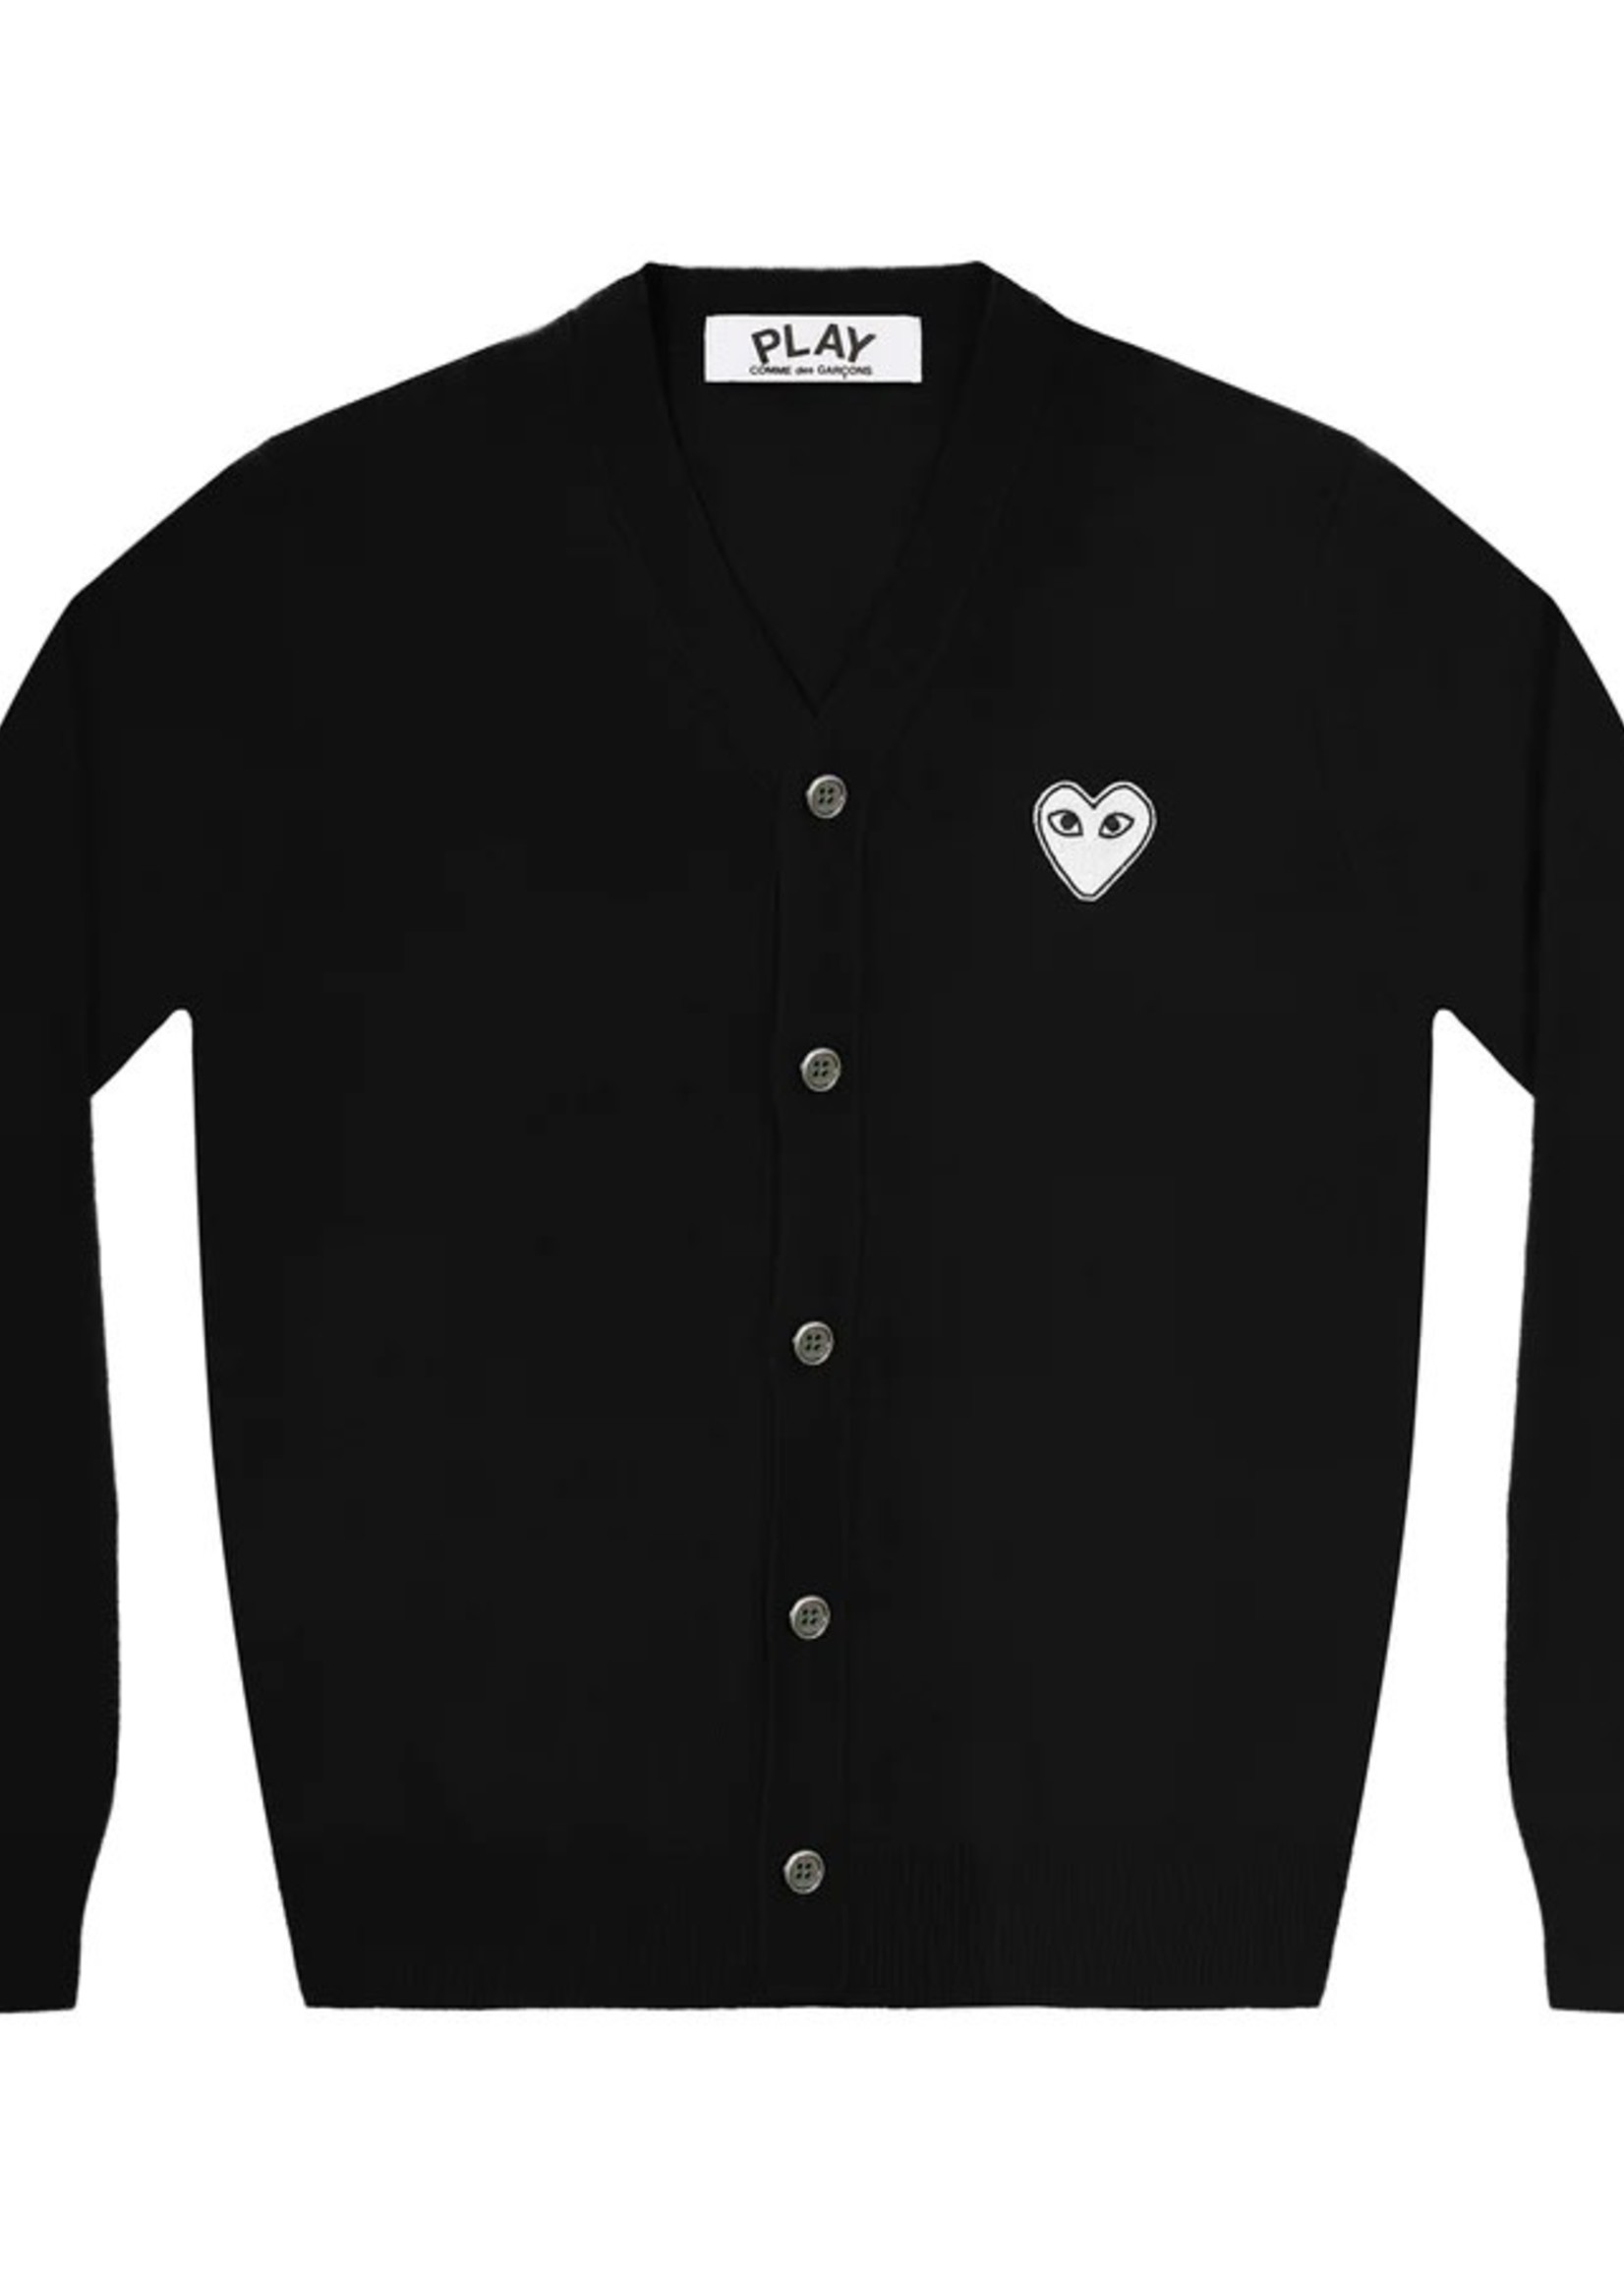 COMME des GARÇONS PLAY Black Wool Cardigan with White Heart